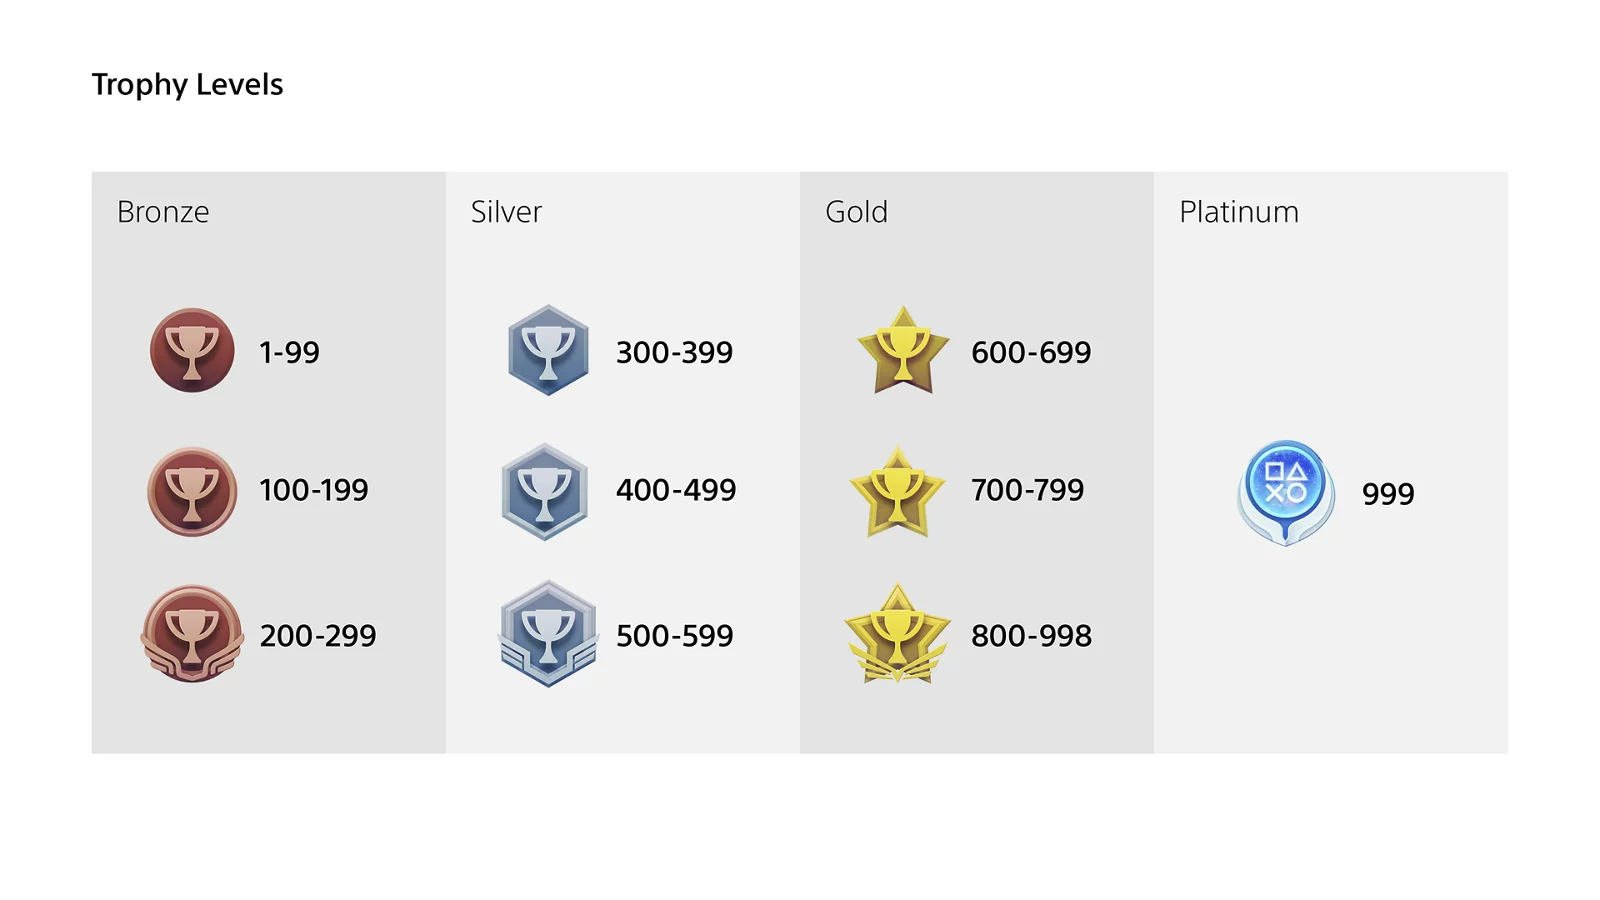 Trophy levels support 31.03.2021